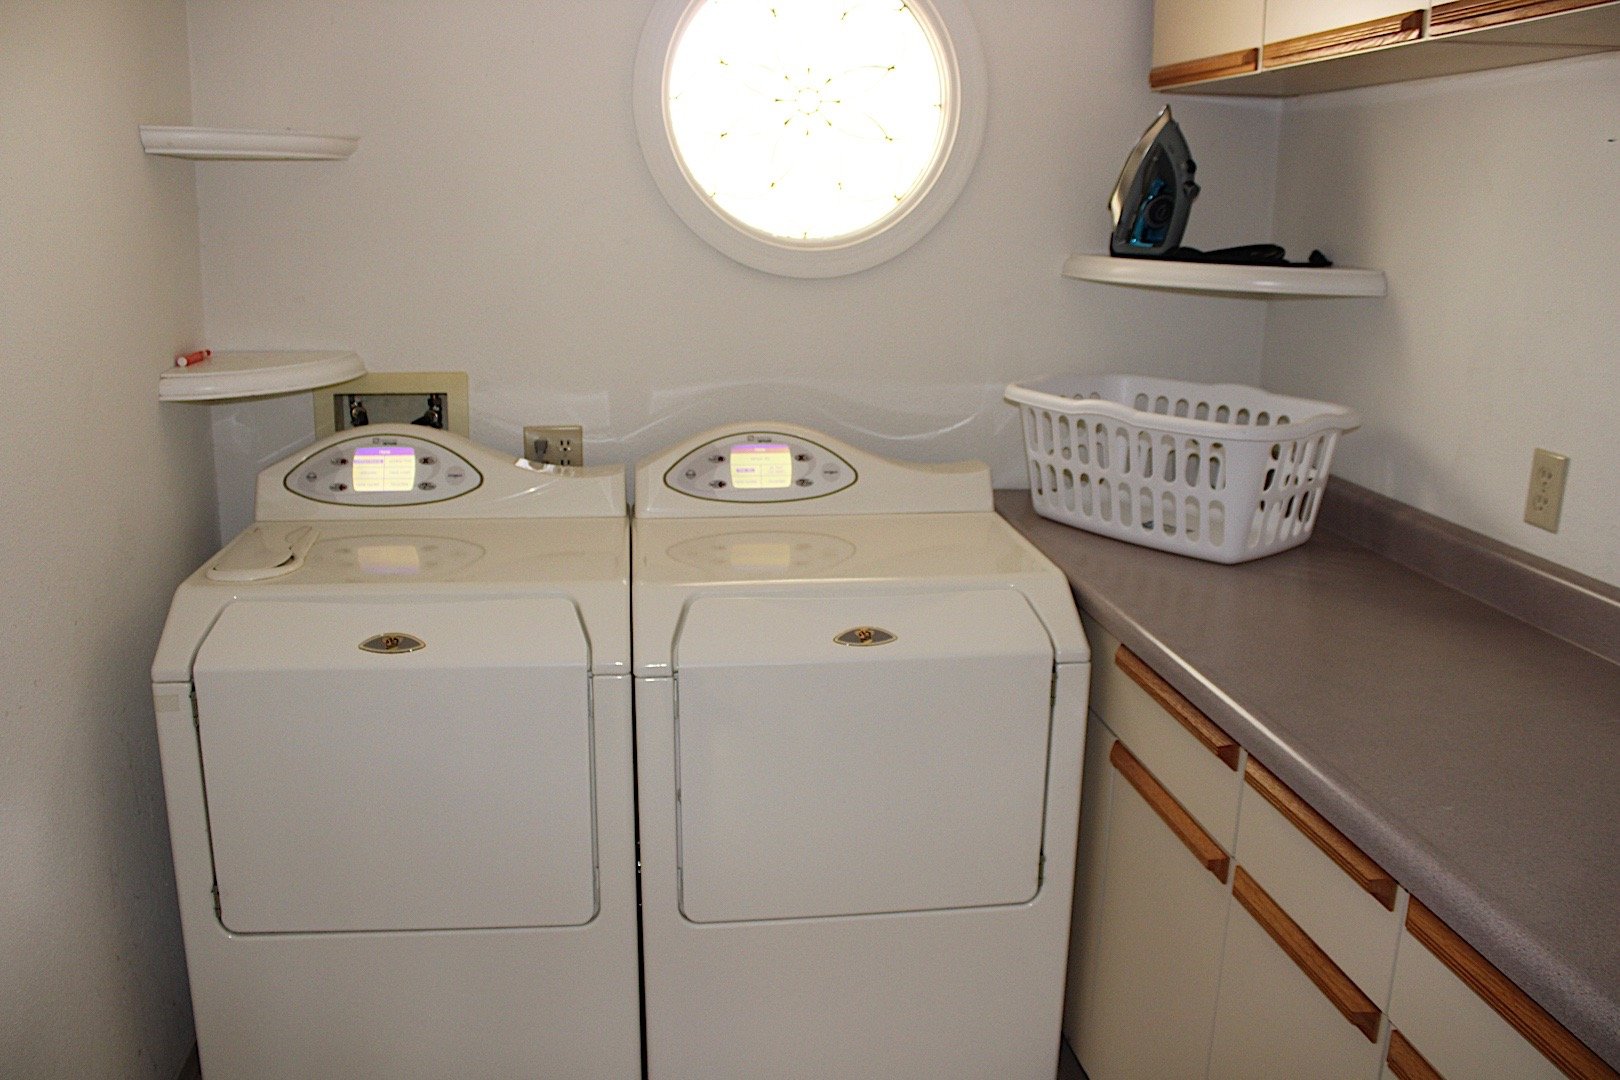 (And there's a laundry room to dry the wet suits in!)